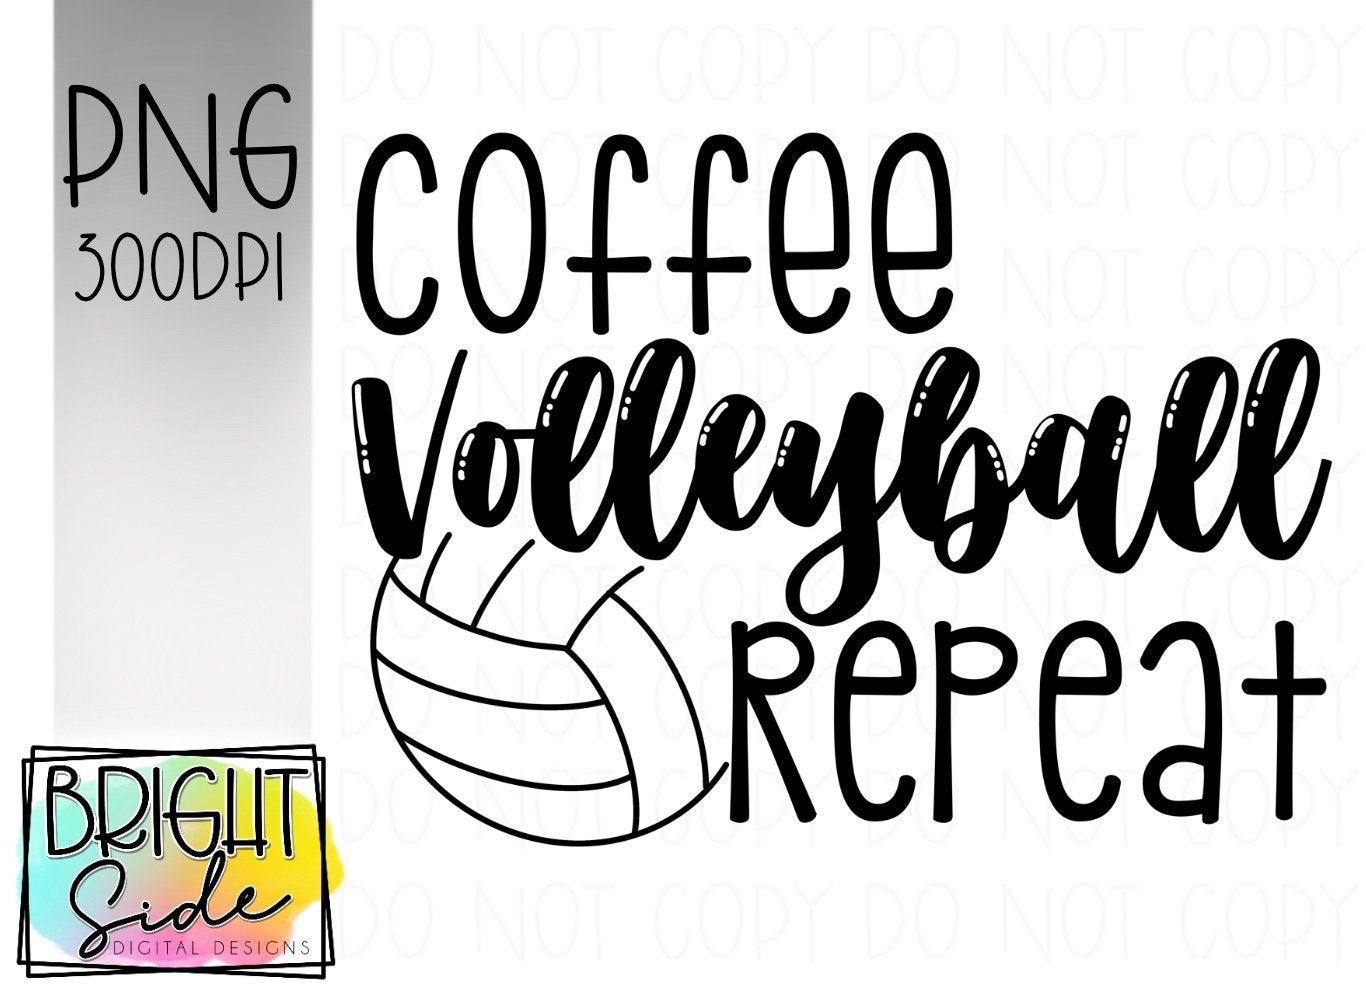 Coffee Volleyball Repeat